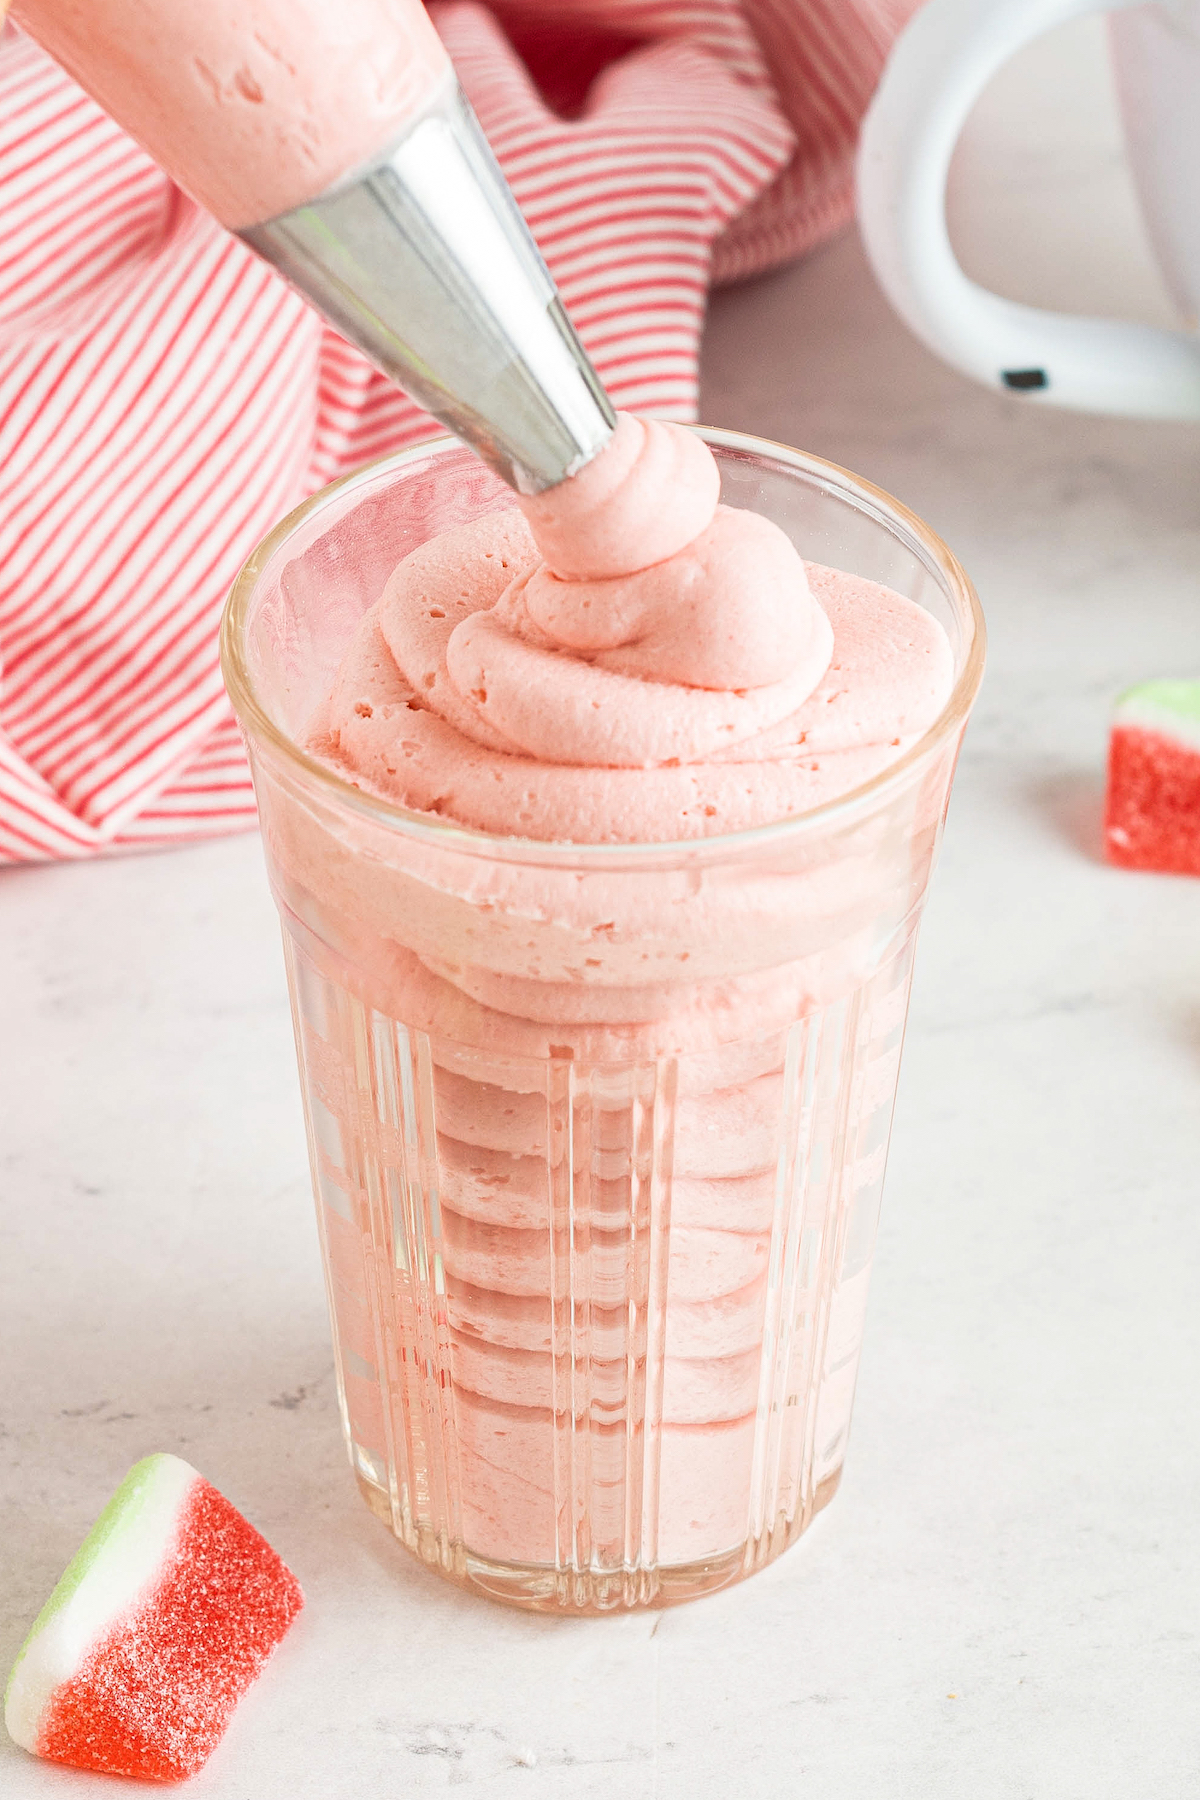 Pink watermelon buttercream is piped into a glass with a piping bag.